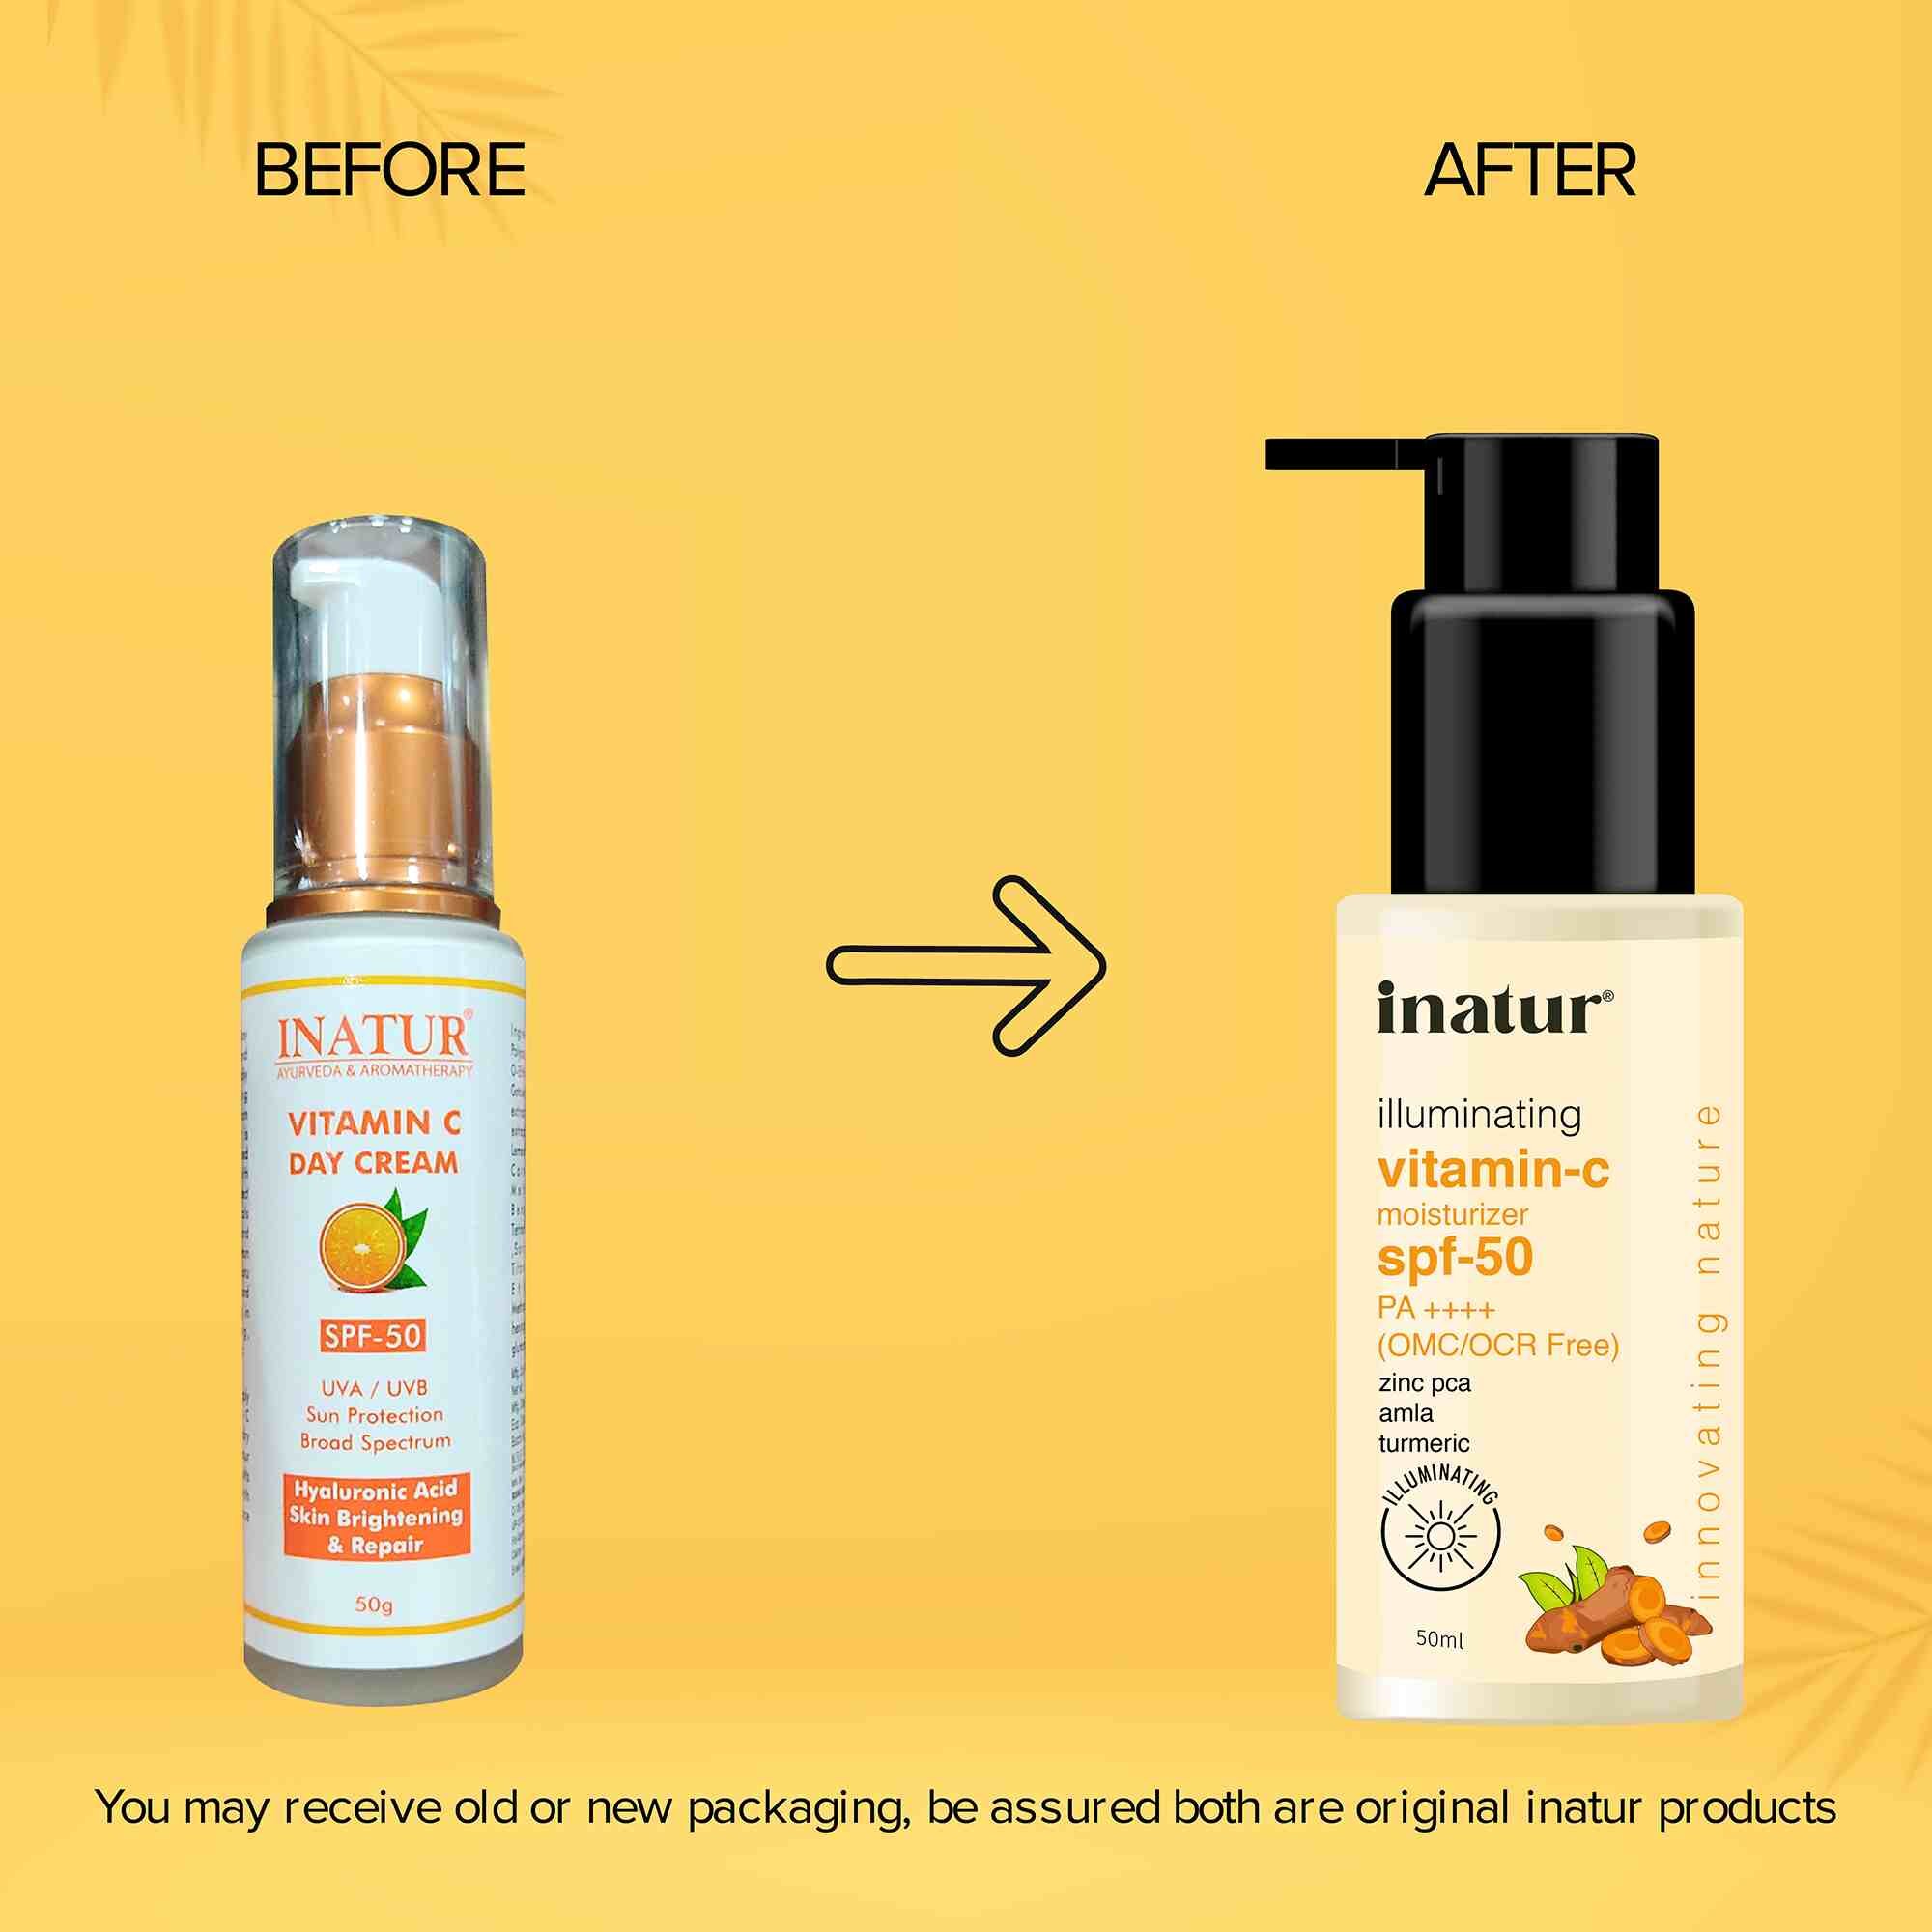 inatur vitamin c spf 50 before and after